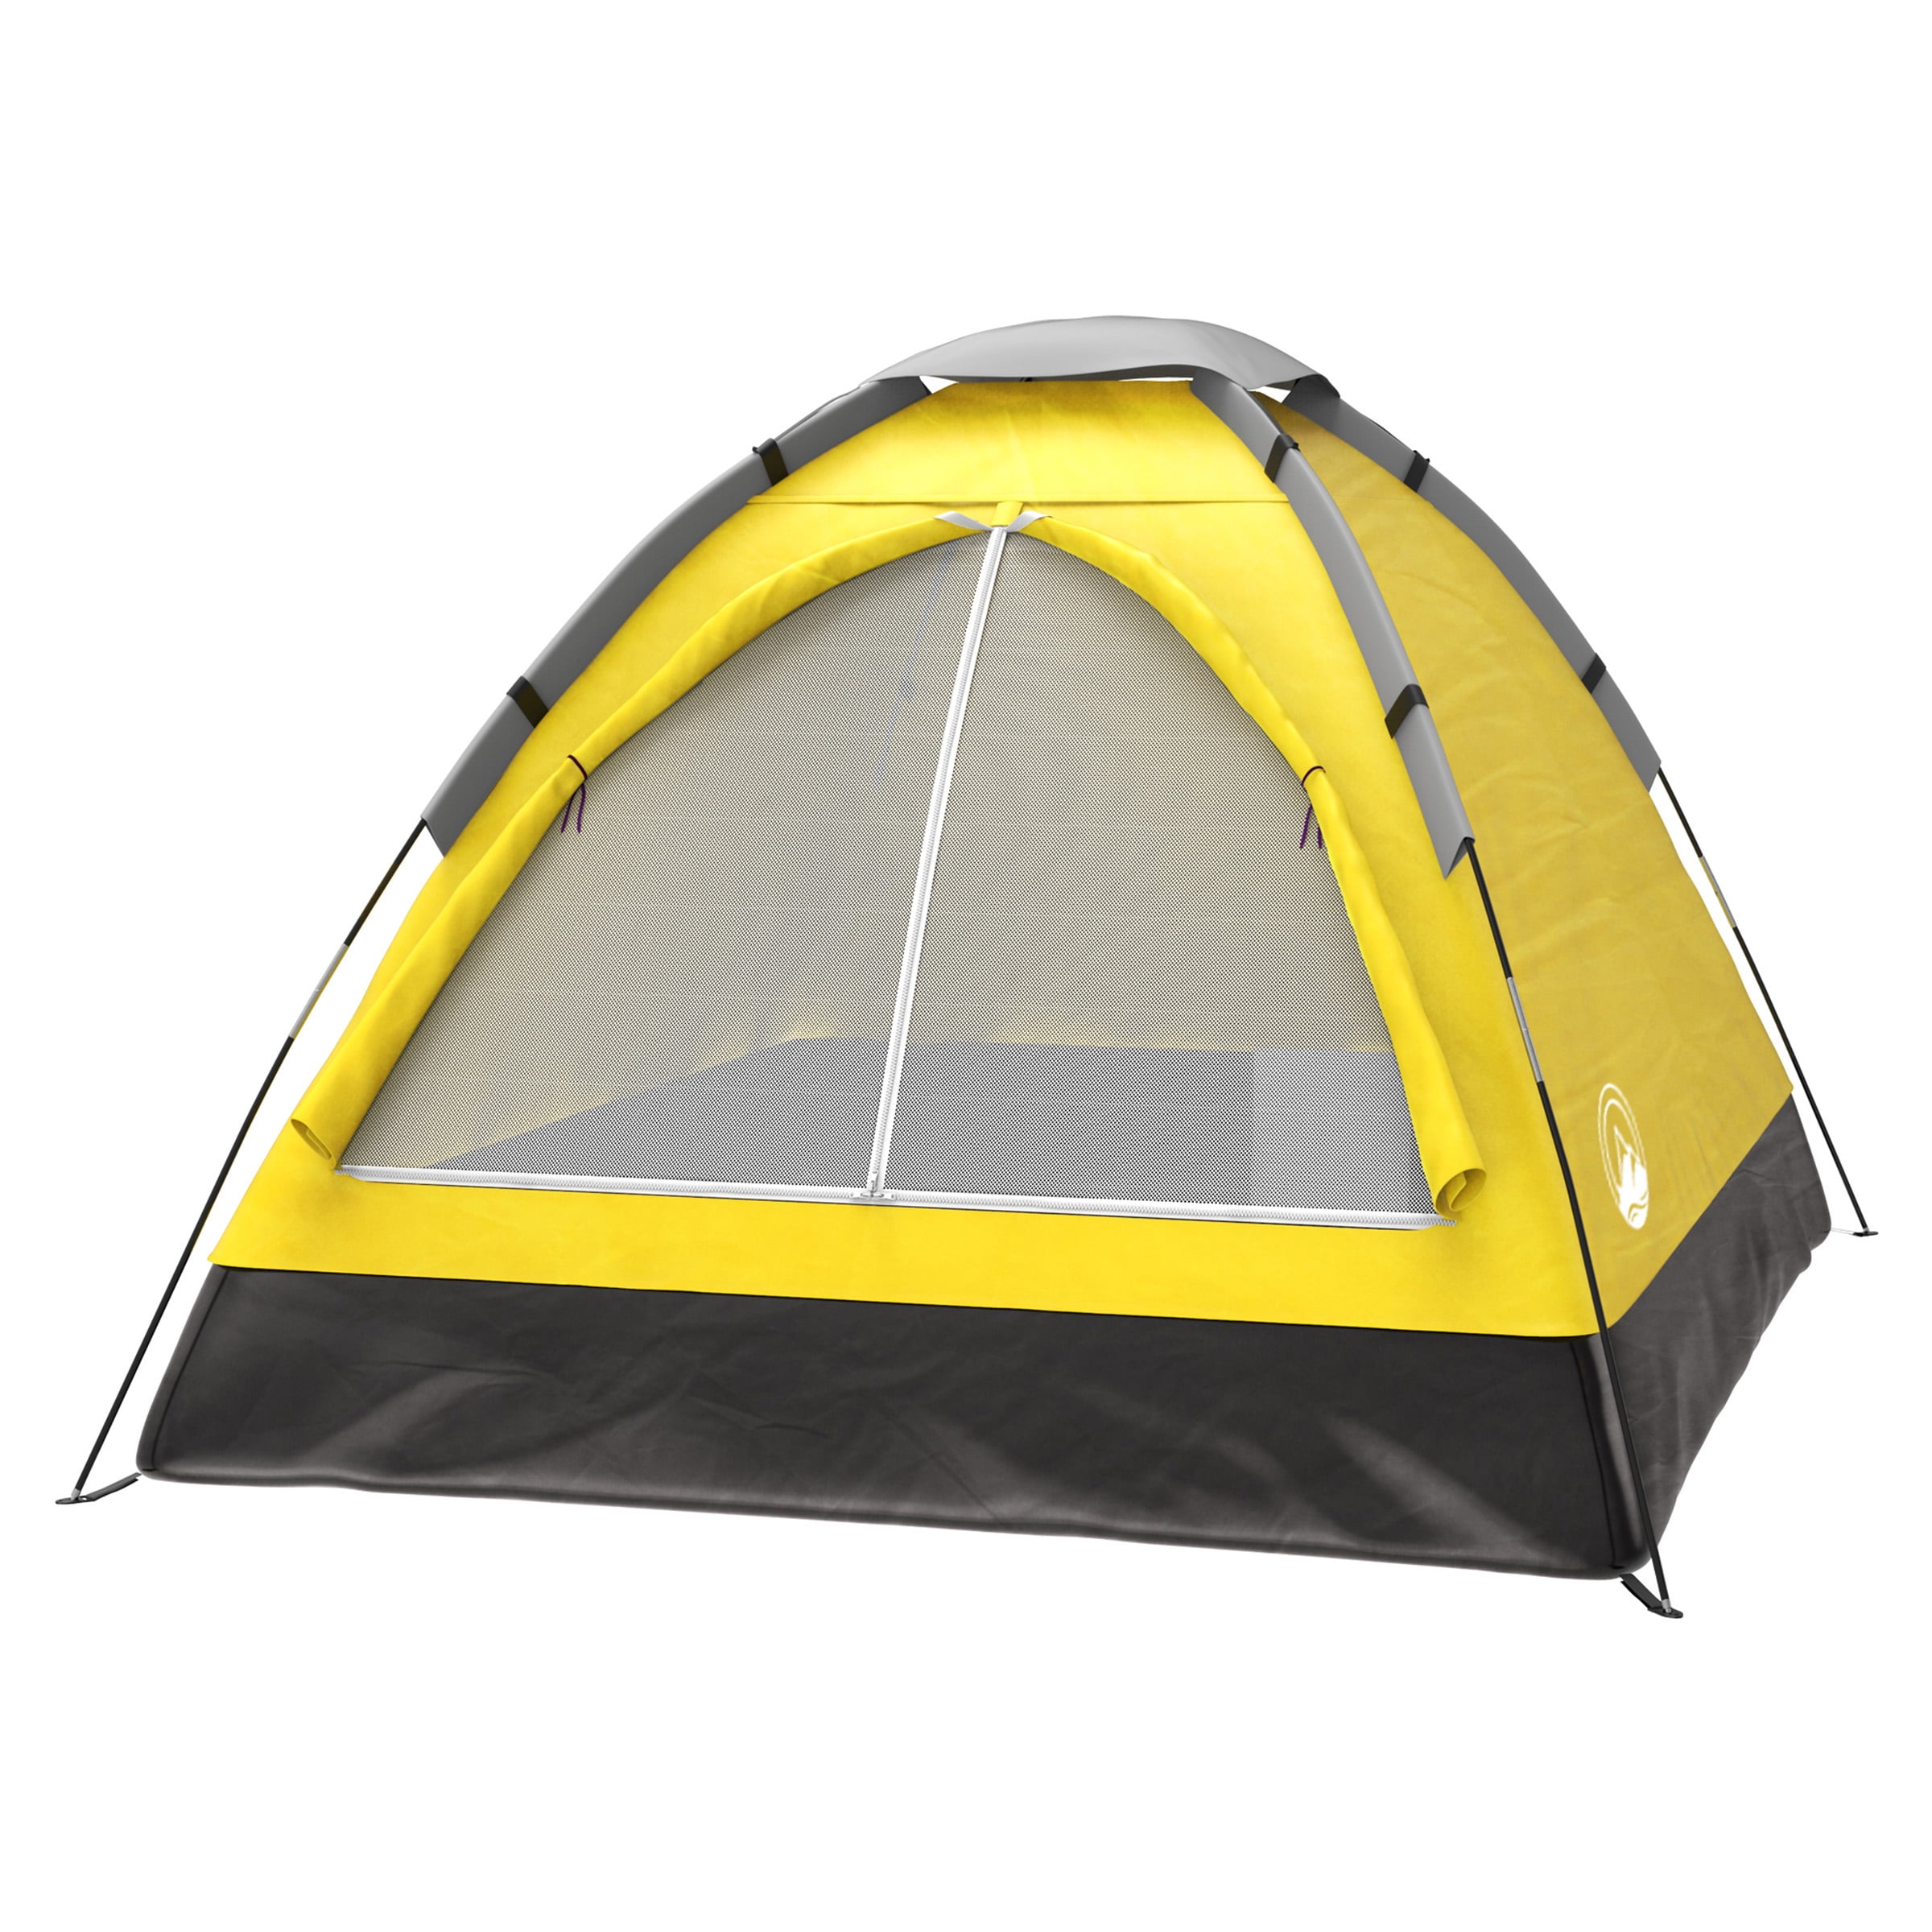 festivals and holidays Outdoor tent lightweight Pop Up throw tent Tent in yellow and blue with carry bag perfect for camping 